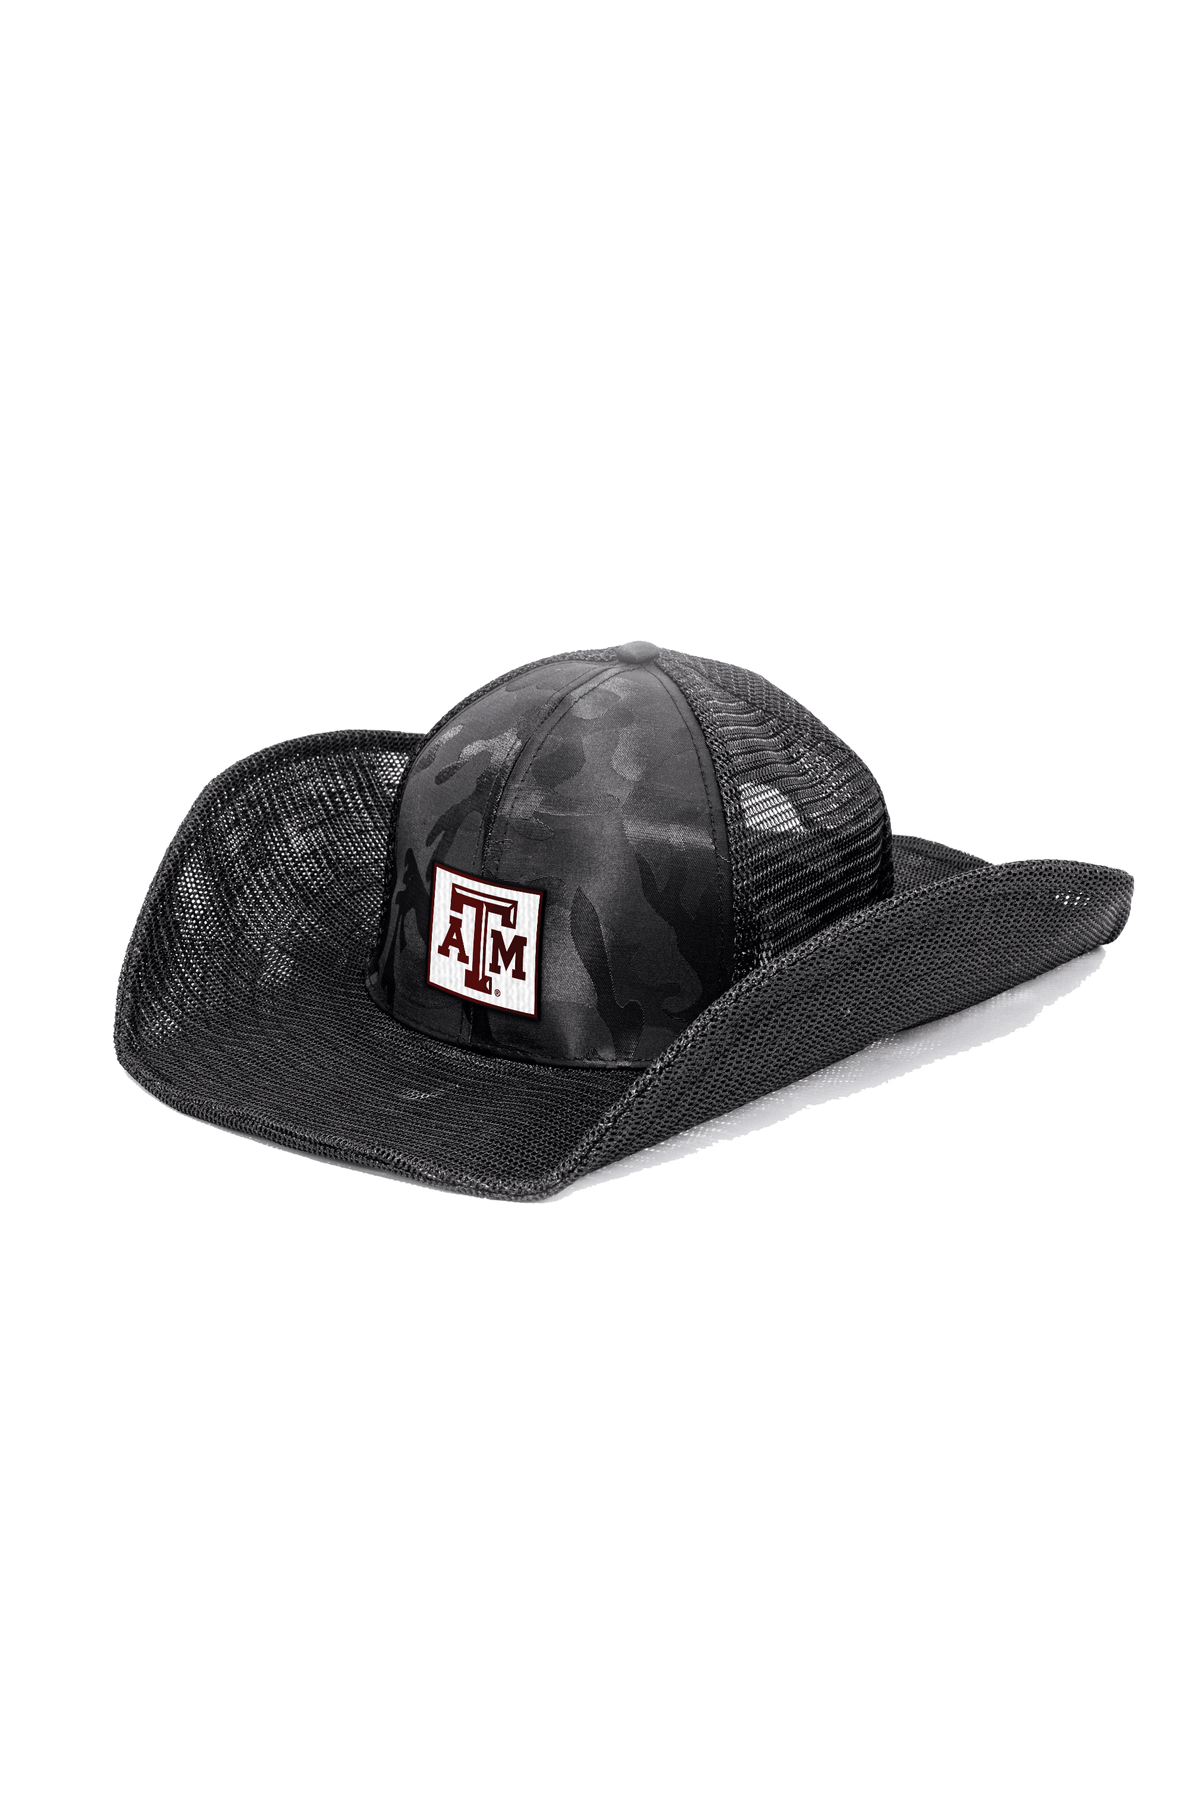 TEXAS A&M EMBROIDERED PATCH - Cowboy Snapback